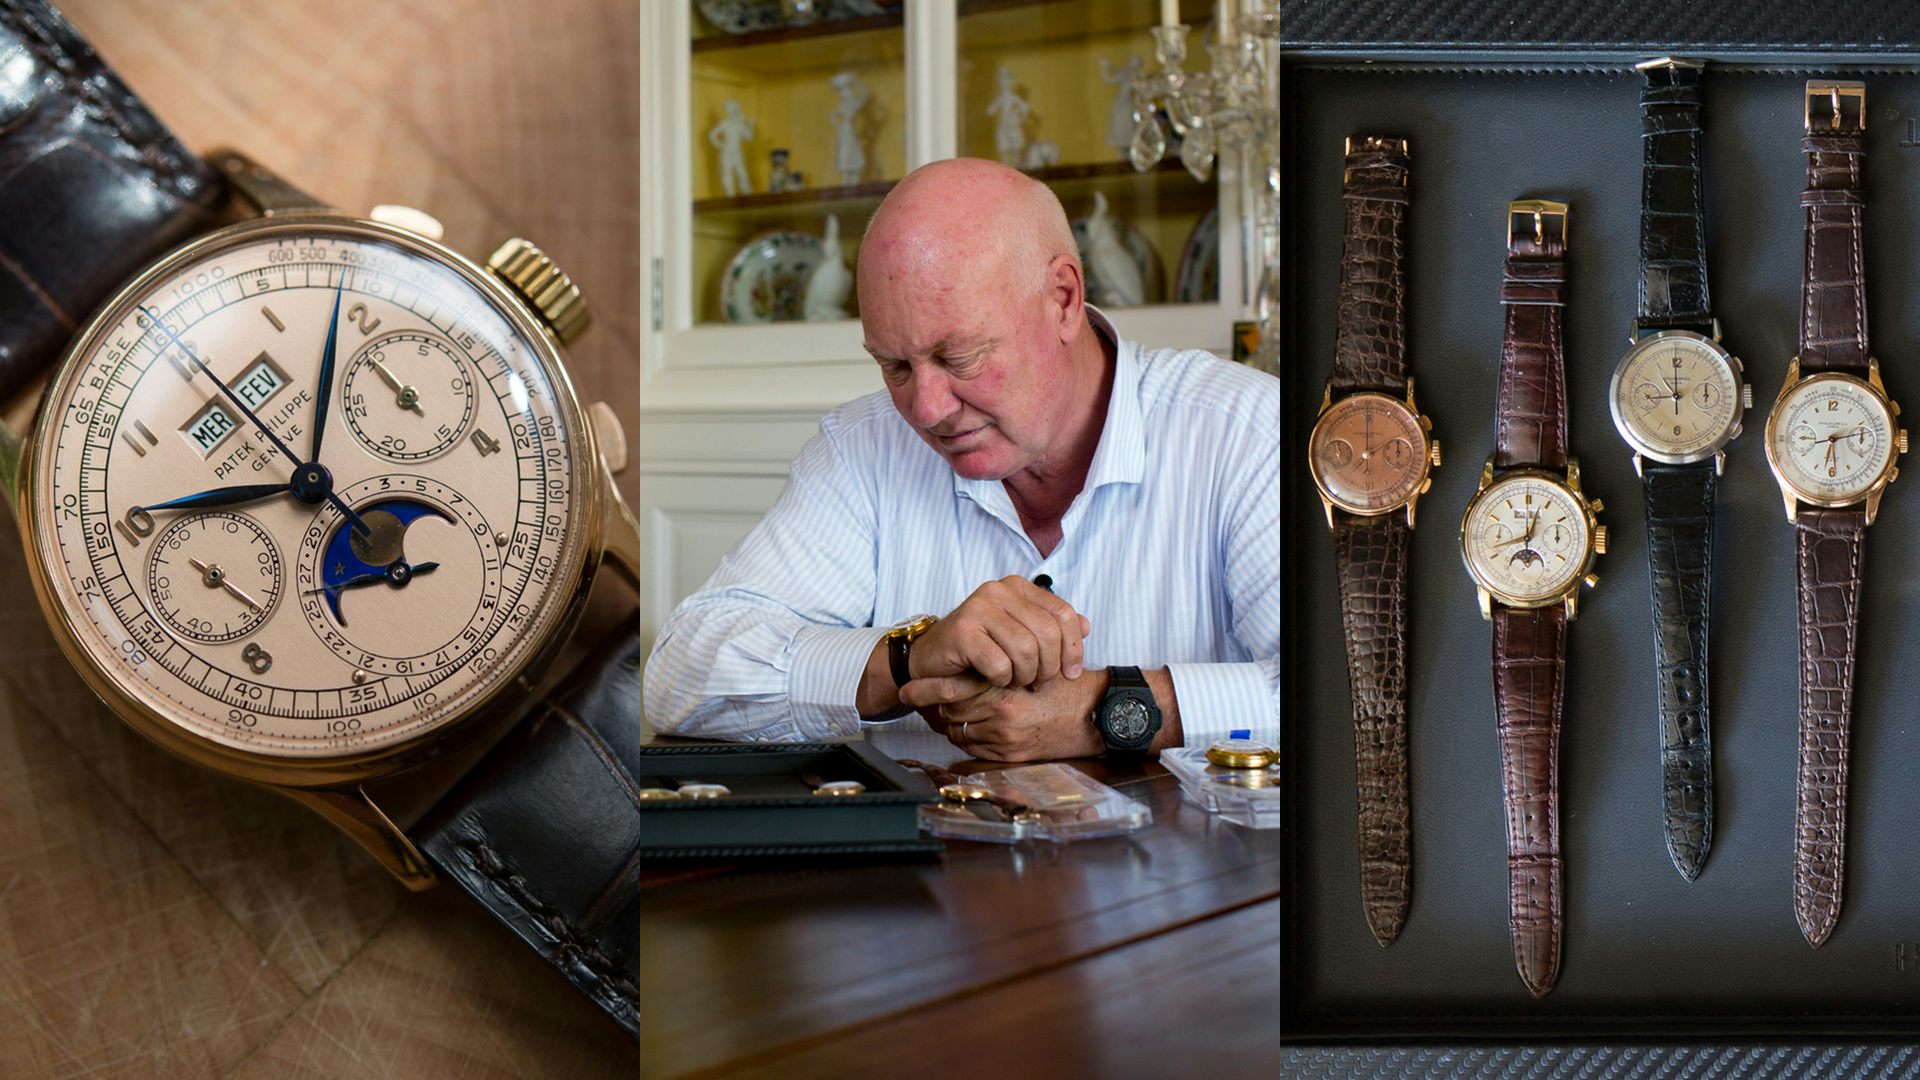 Jean-Claude Biver's Watch Collection